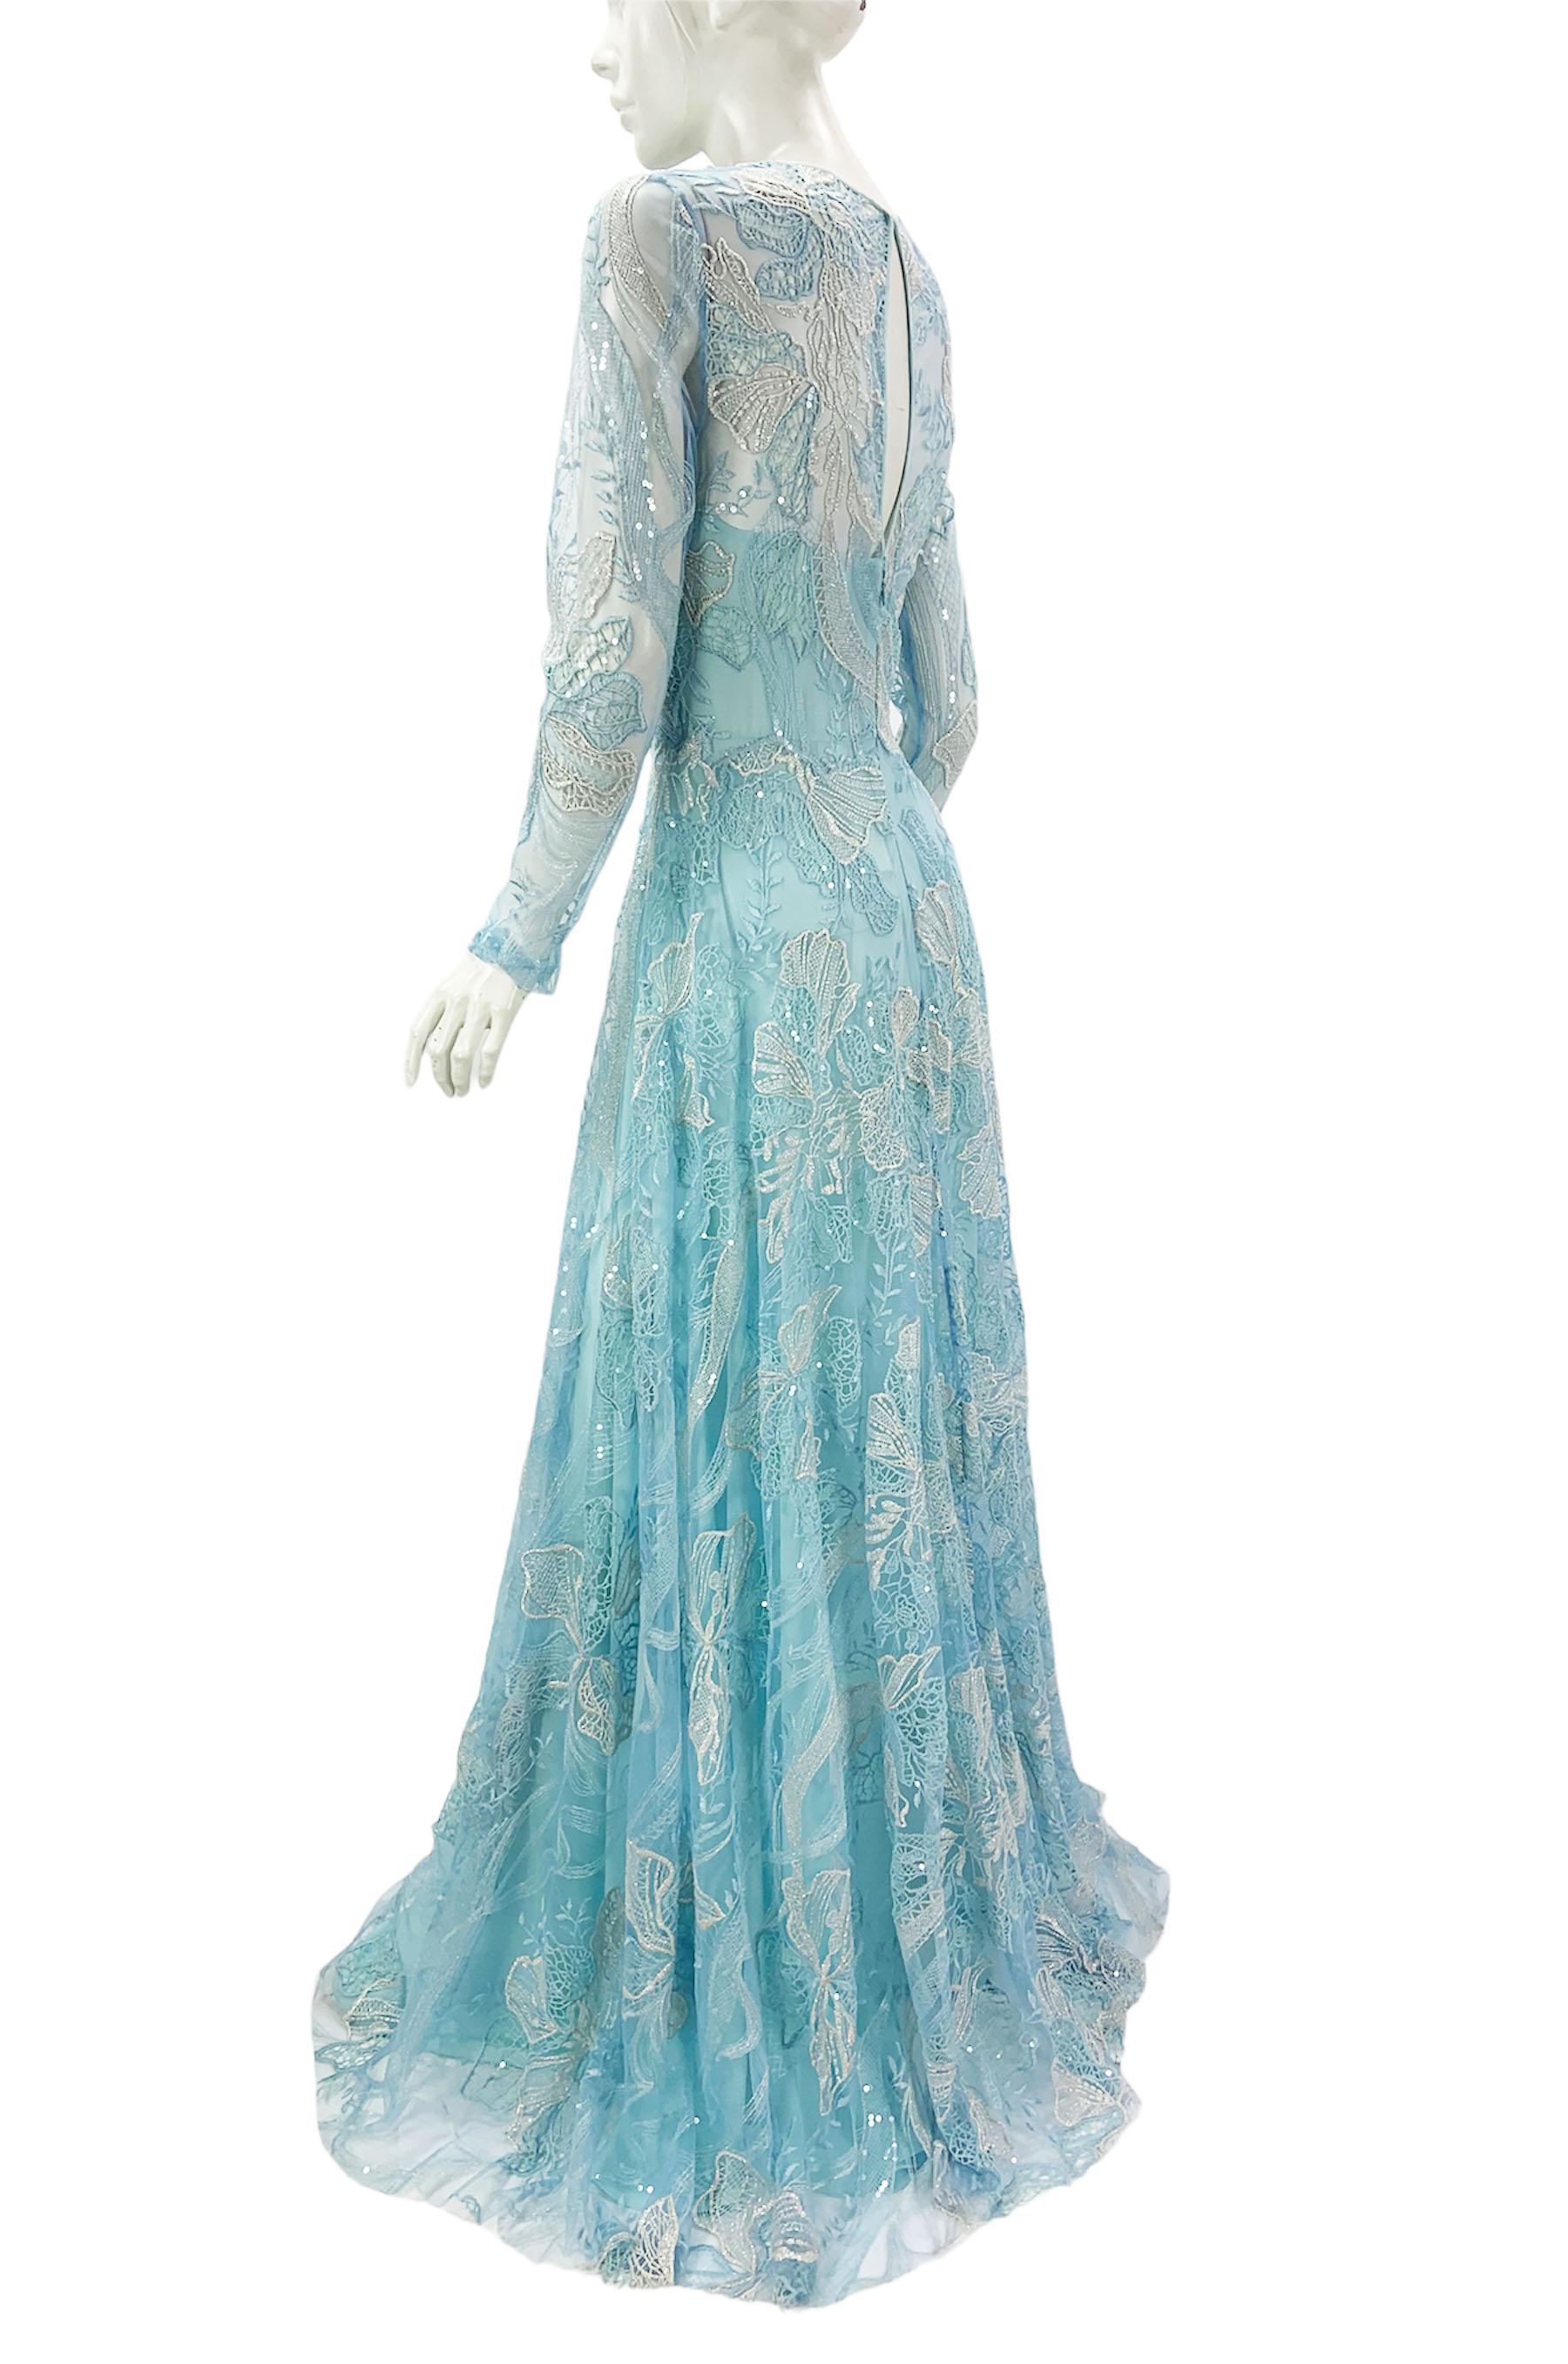 Women's NWT Naeem Khan Blue Lace Embellished Tulle Maxi Dress Gown US 4 For Sale